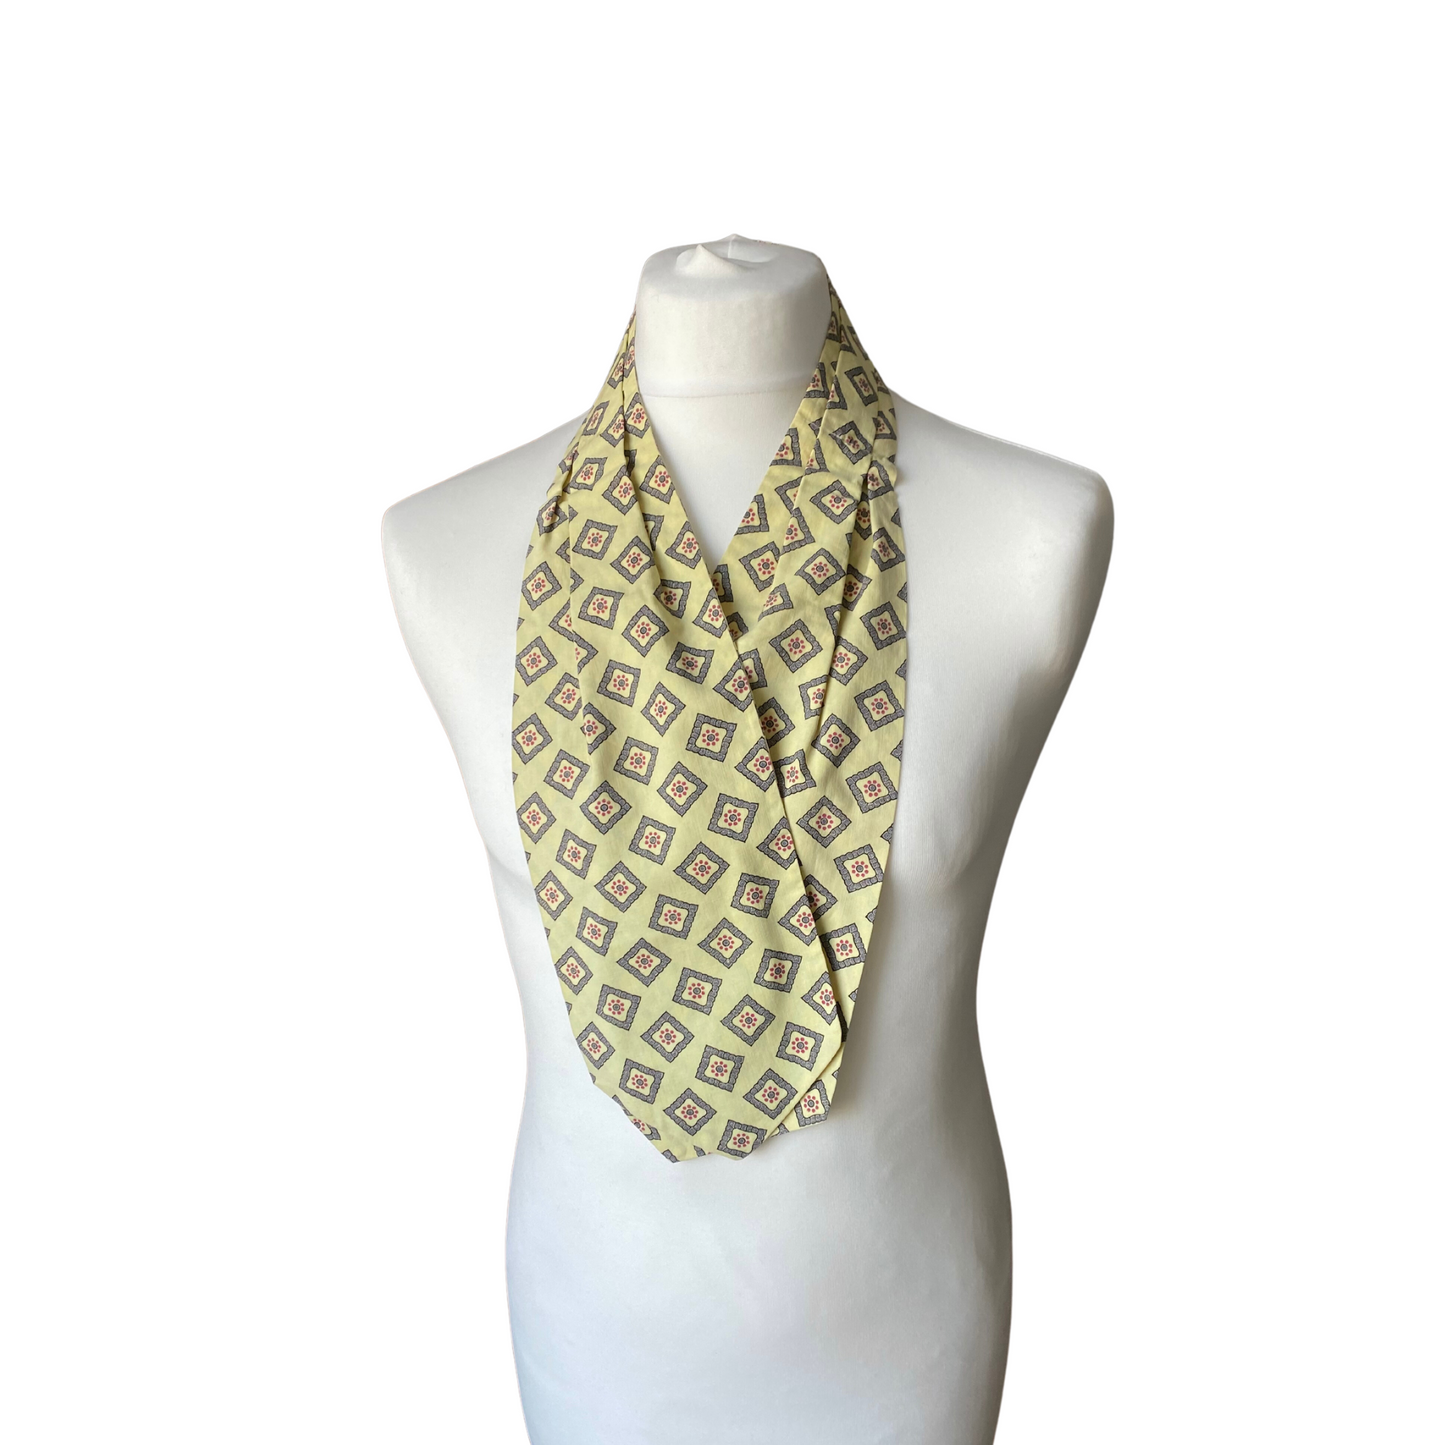 Mod style pale yellow, grey blue and red print vintage cravat by British brand Duggie